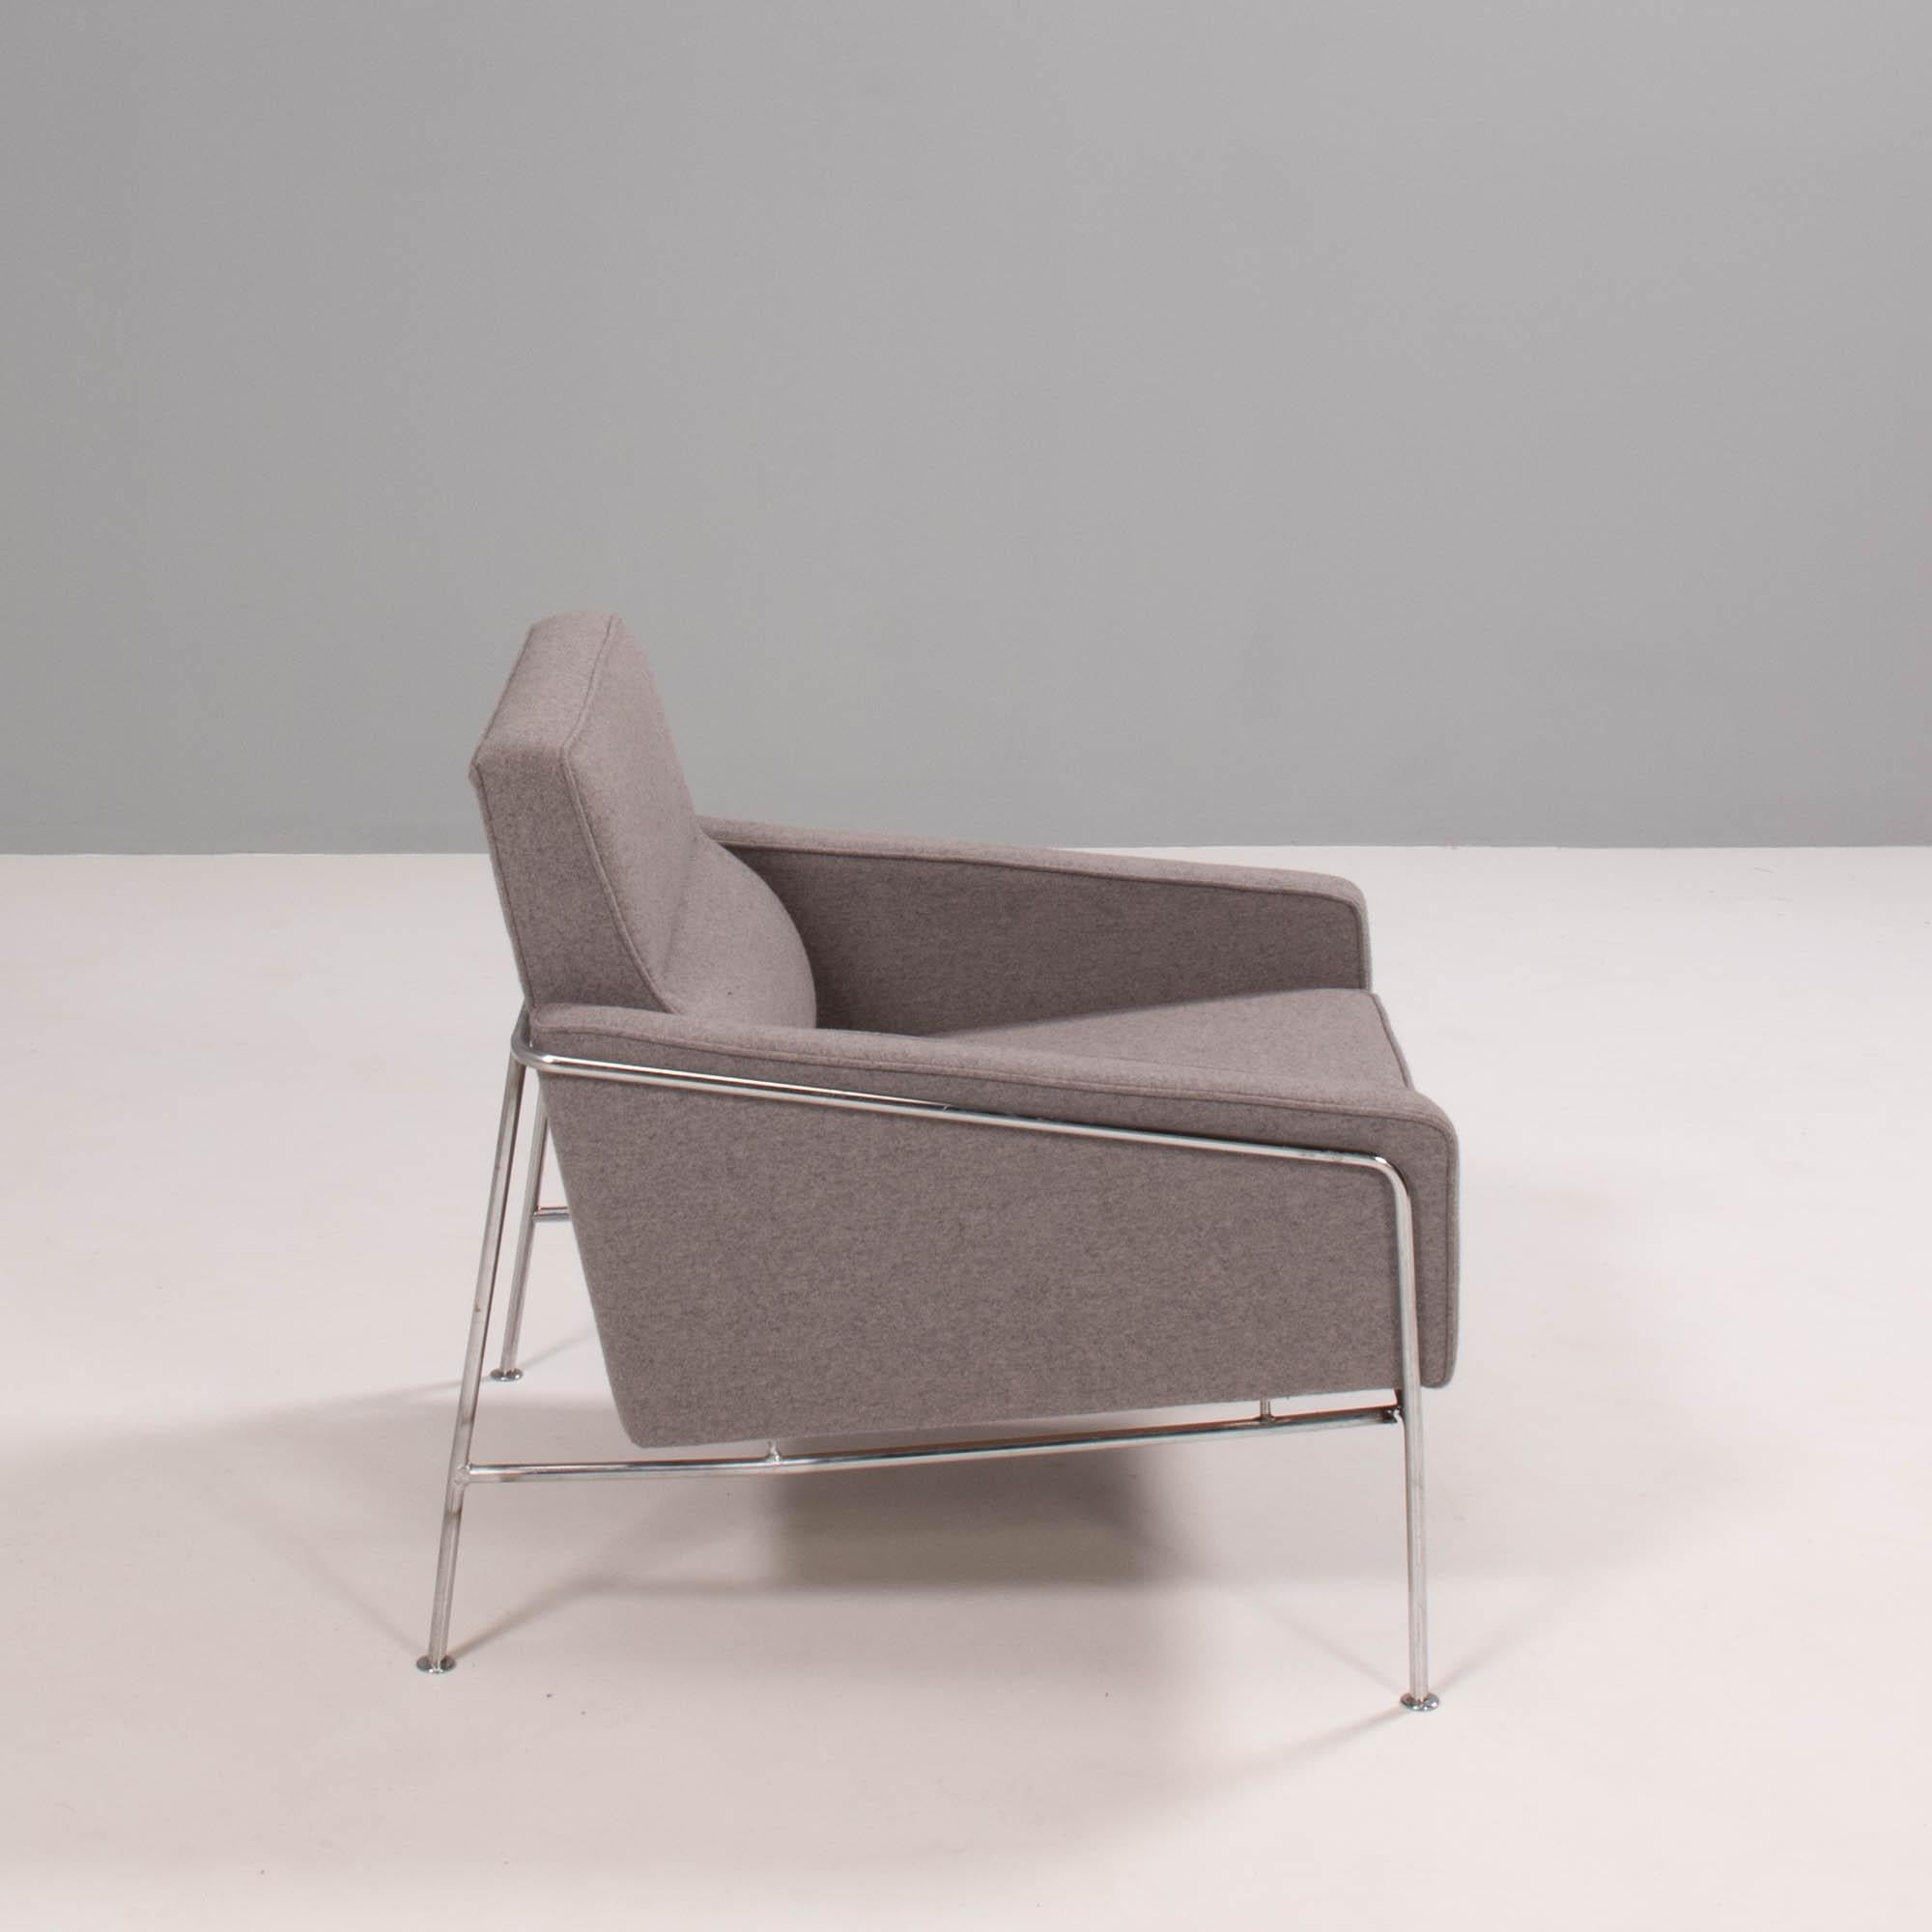 Originally designed by Arne Jacobsen for the SAS Air Terminal in Copenhagen, the Series 3300 chair has a futuristic aesthetic.

Featuring a slim tubular chrome frame, the chairs are upholstered in grey fabric with angular armrests and a padded